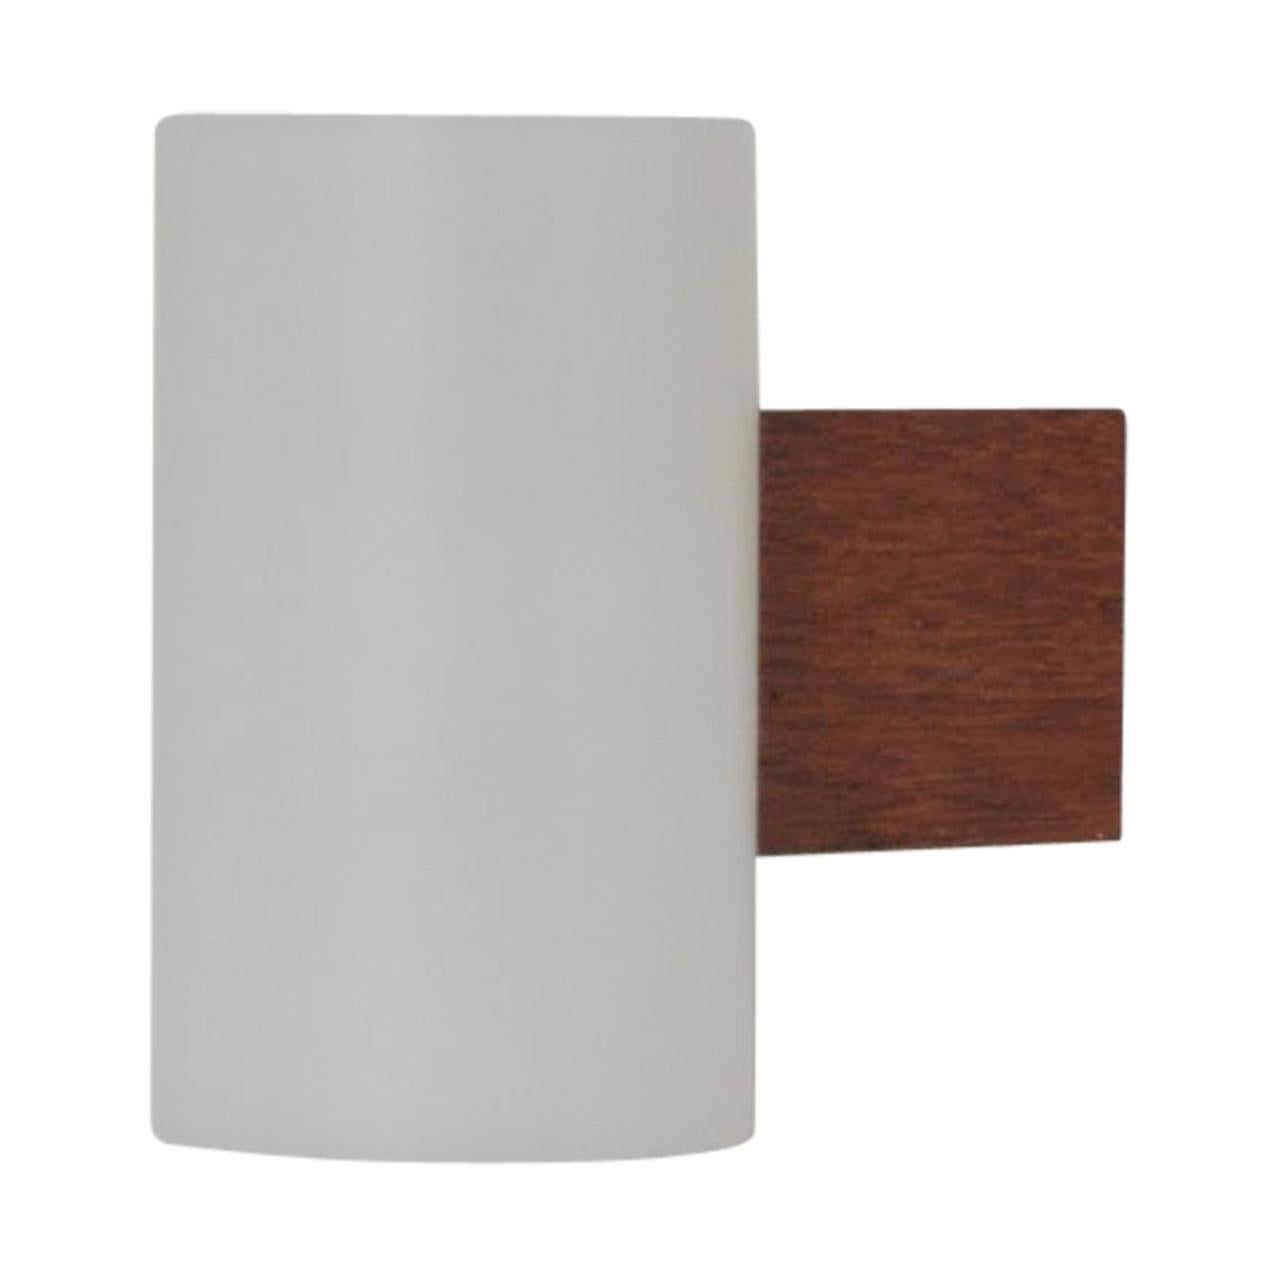 Minimalistic Wall Lamp Designed by Uno & Östen Kristiansson, 1960s For Sale